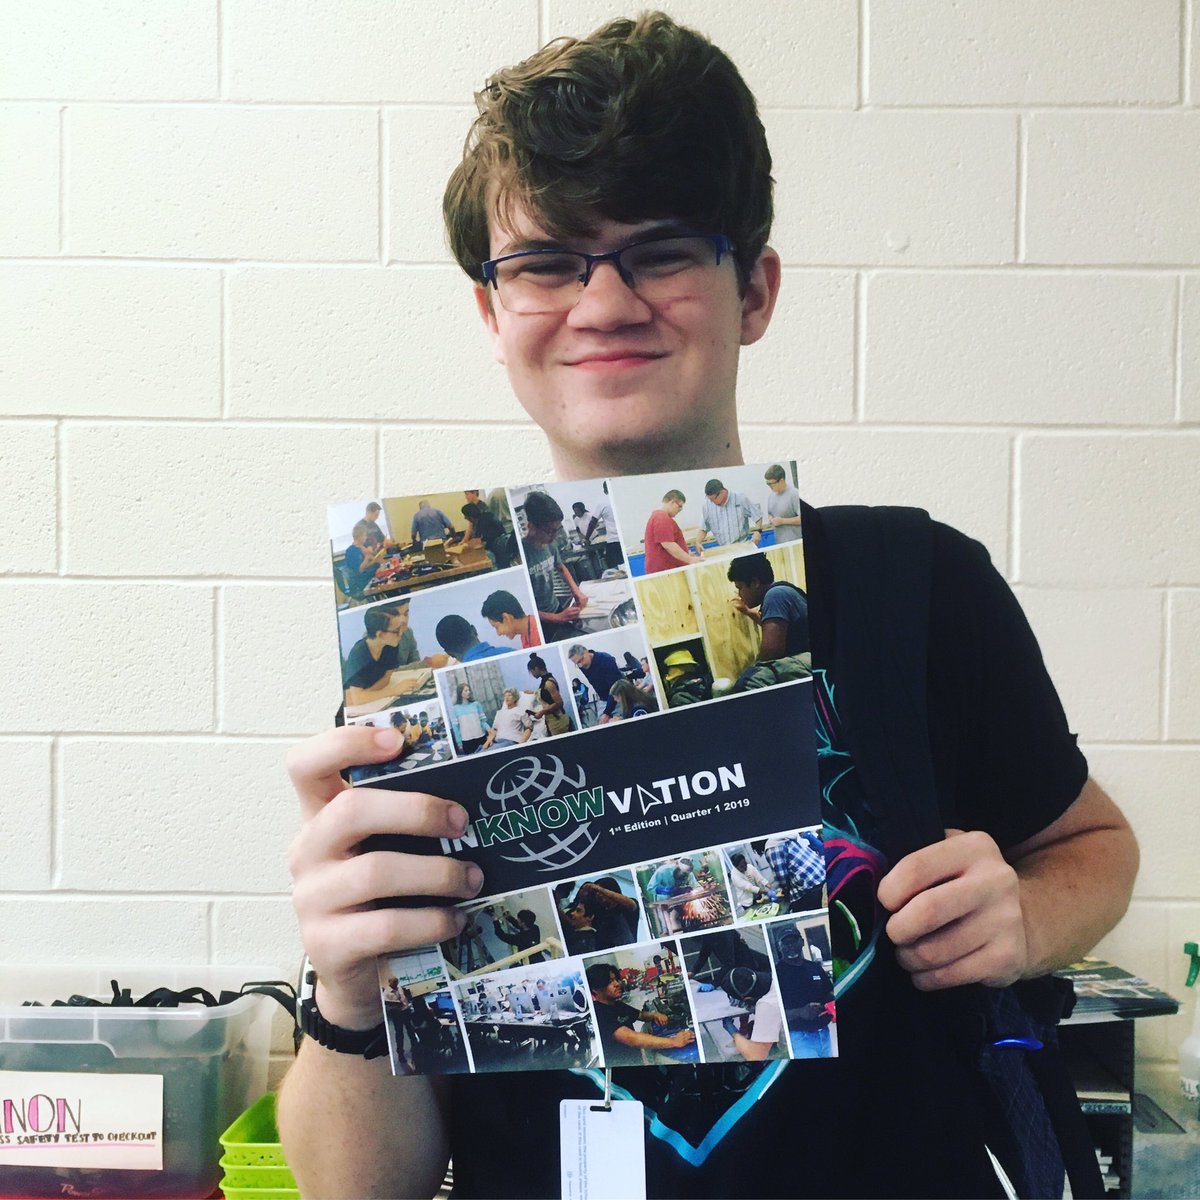 Proud of this guy for completing the first edition of InKNOWvation, L2IC’s quarterly newsletter. #indesignnewbie @L2IC_CATE